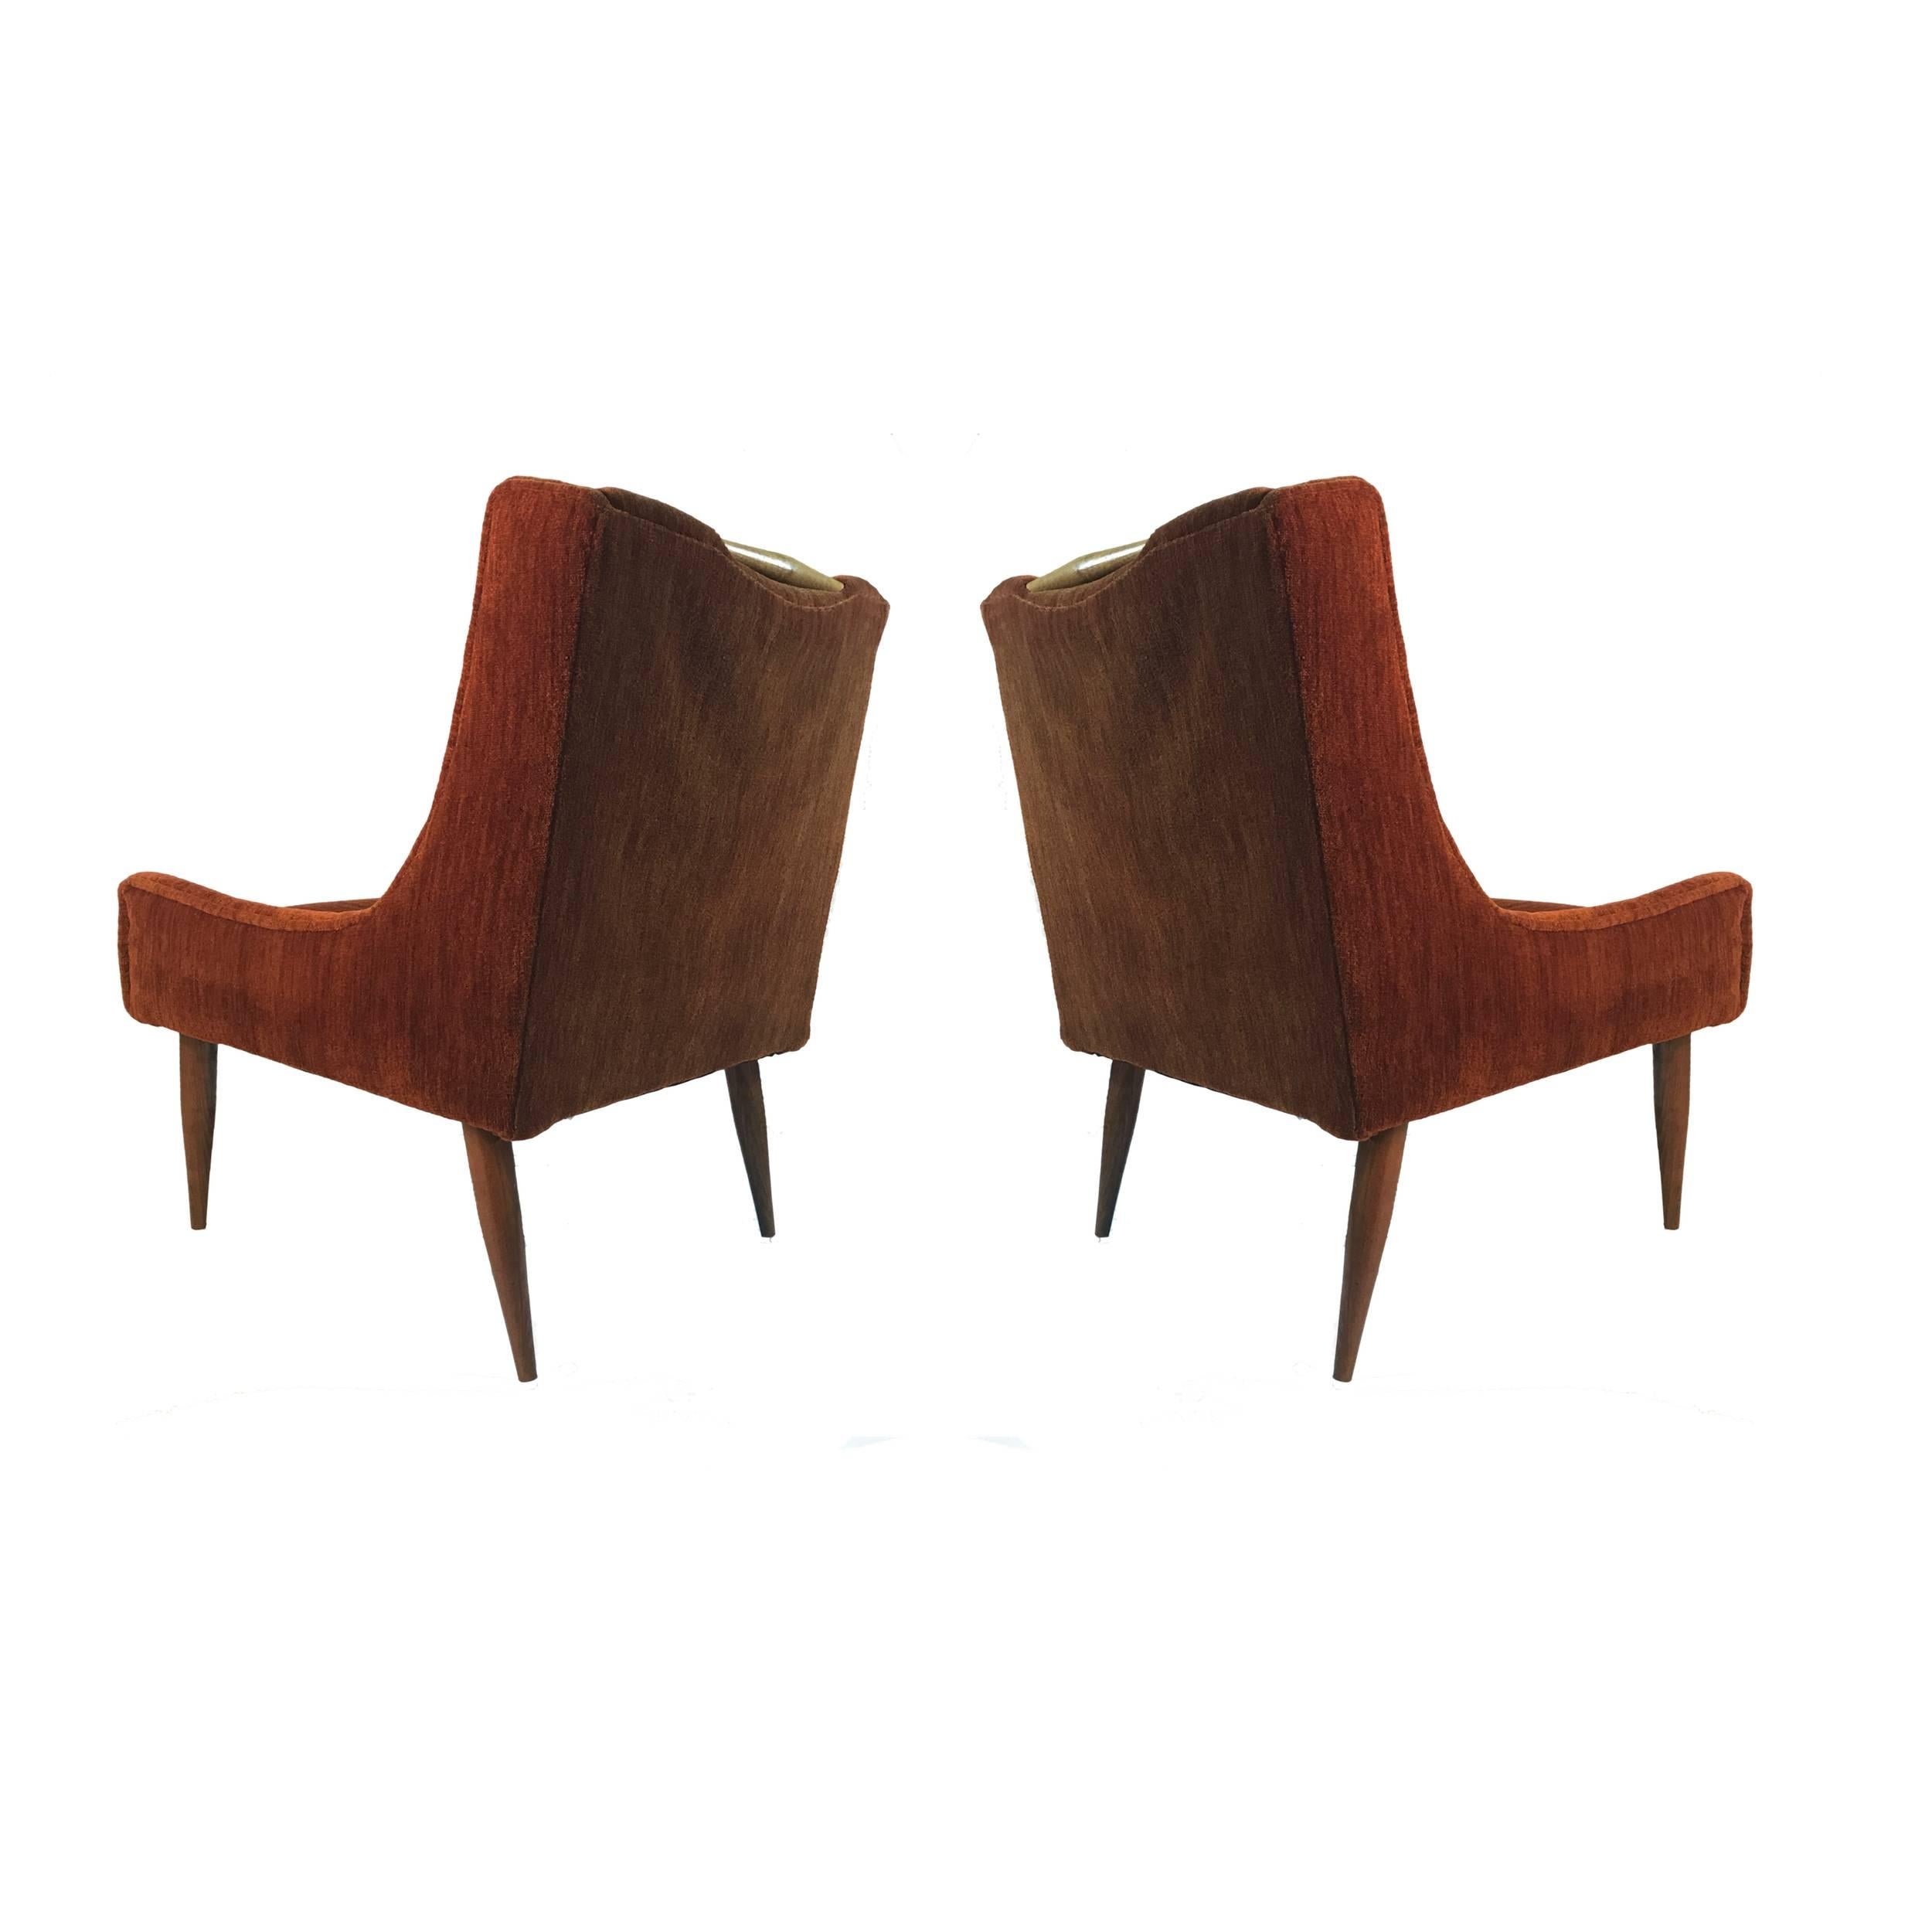 Beautiful pair of Harvey Probber chairs with walnut detail and legs. Mohair type upholstery is in good condition so can be used as they are.
Striking comfortable pair of chairs.